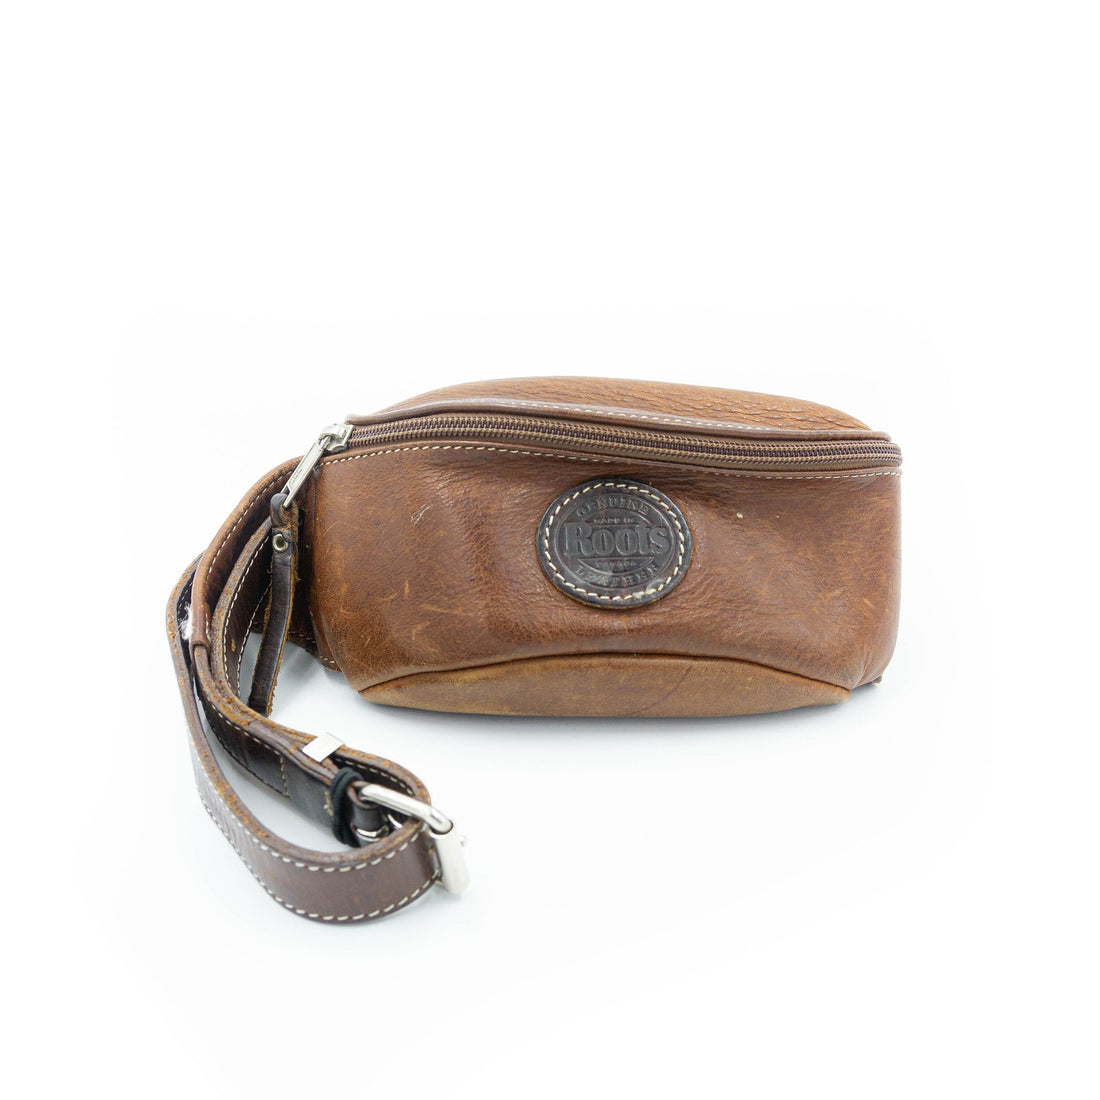 Roots Fanny Pack